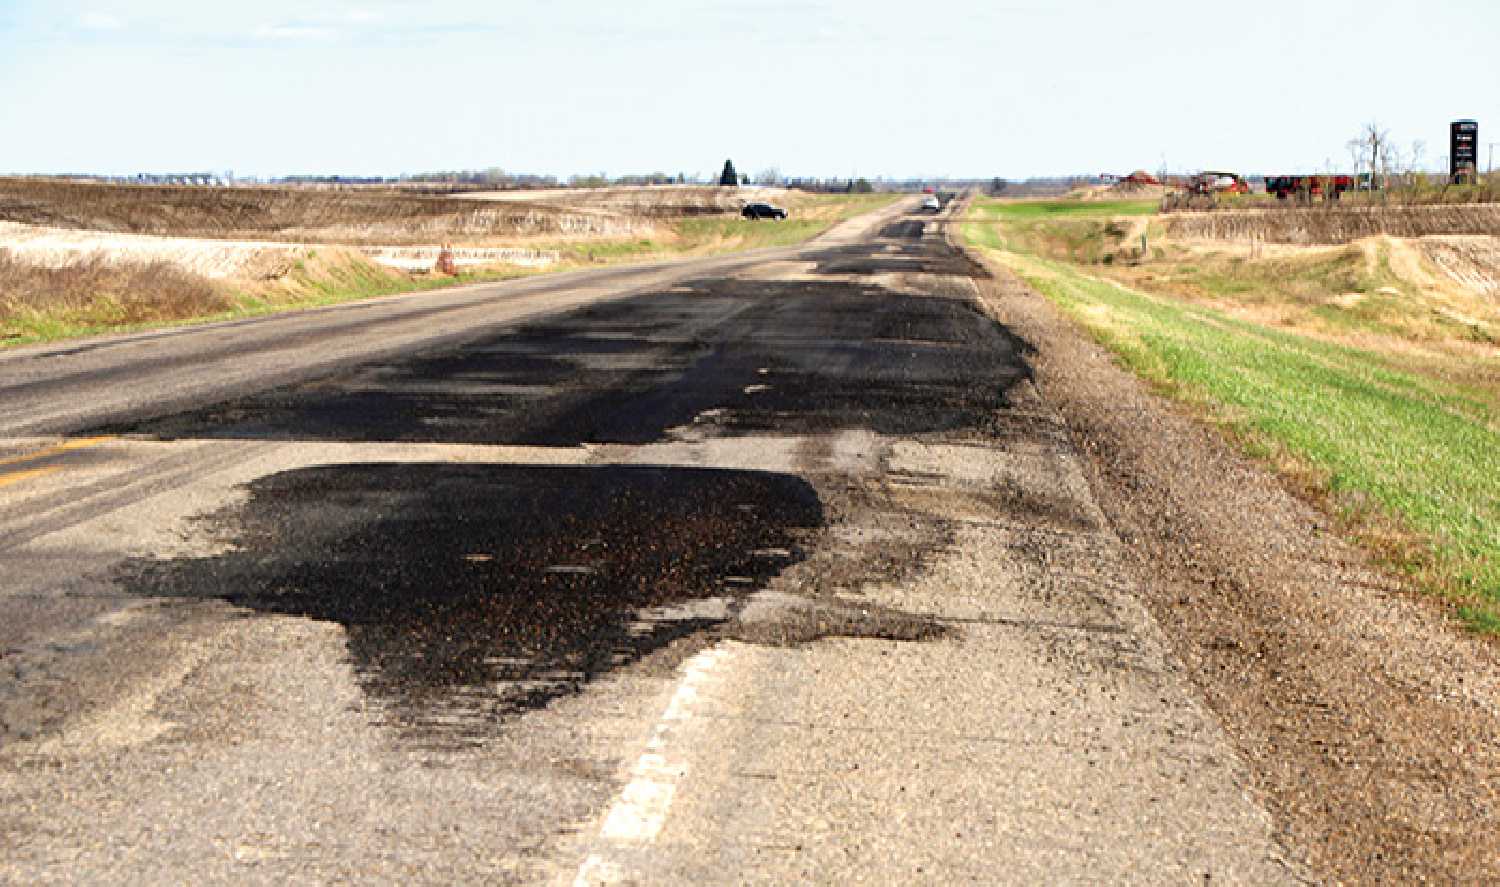 Patching is being done on Highway 8, which is slated to be repaired completely by 2025.